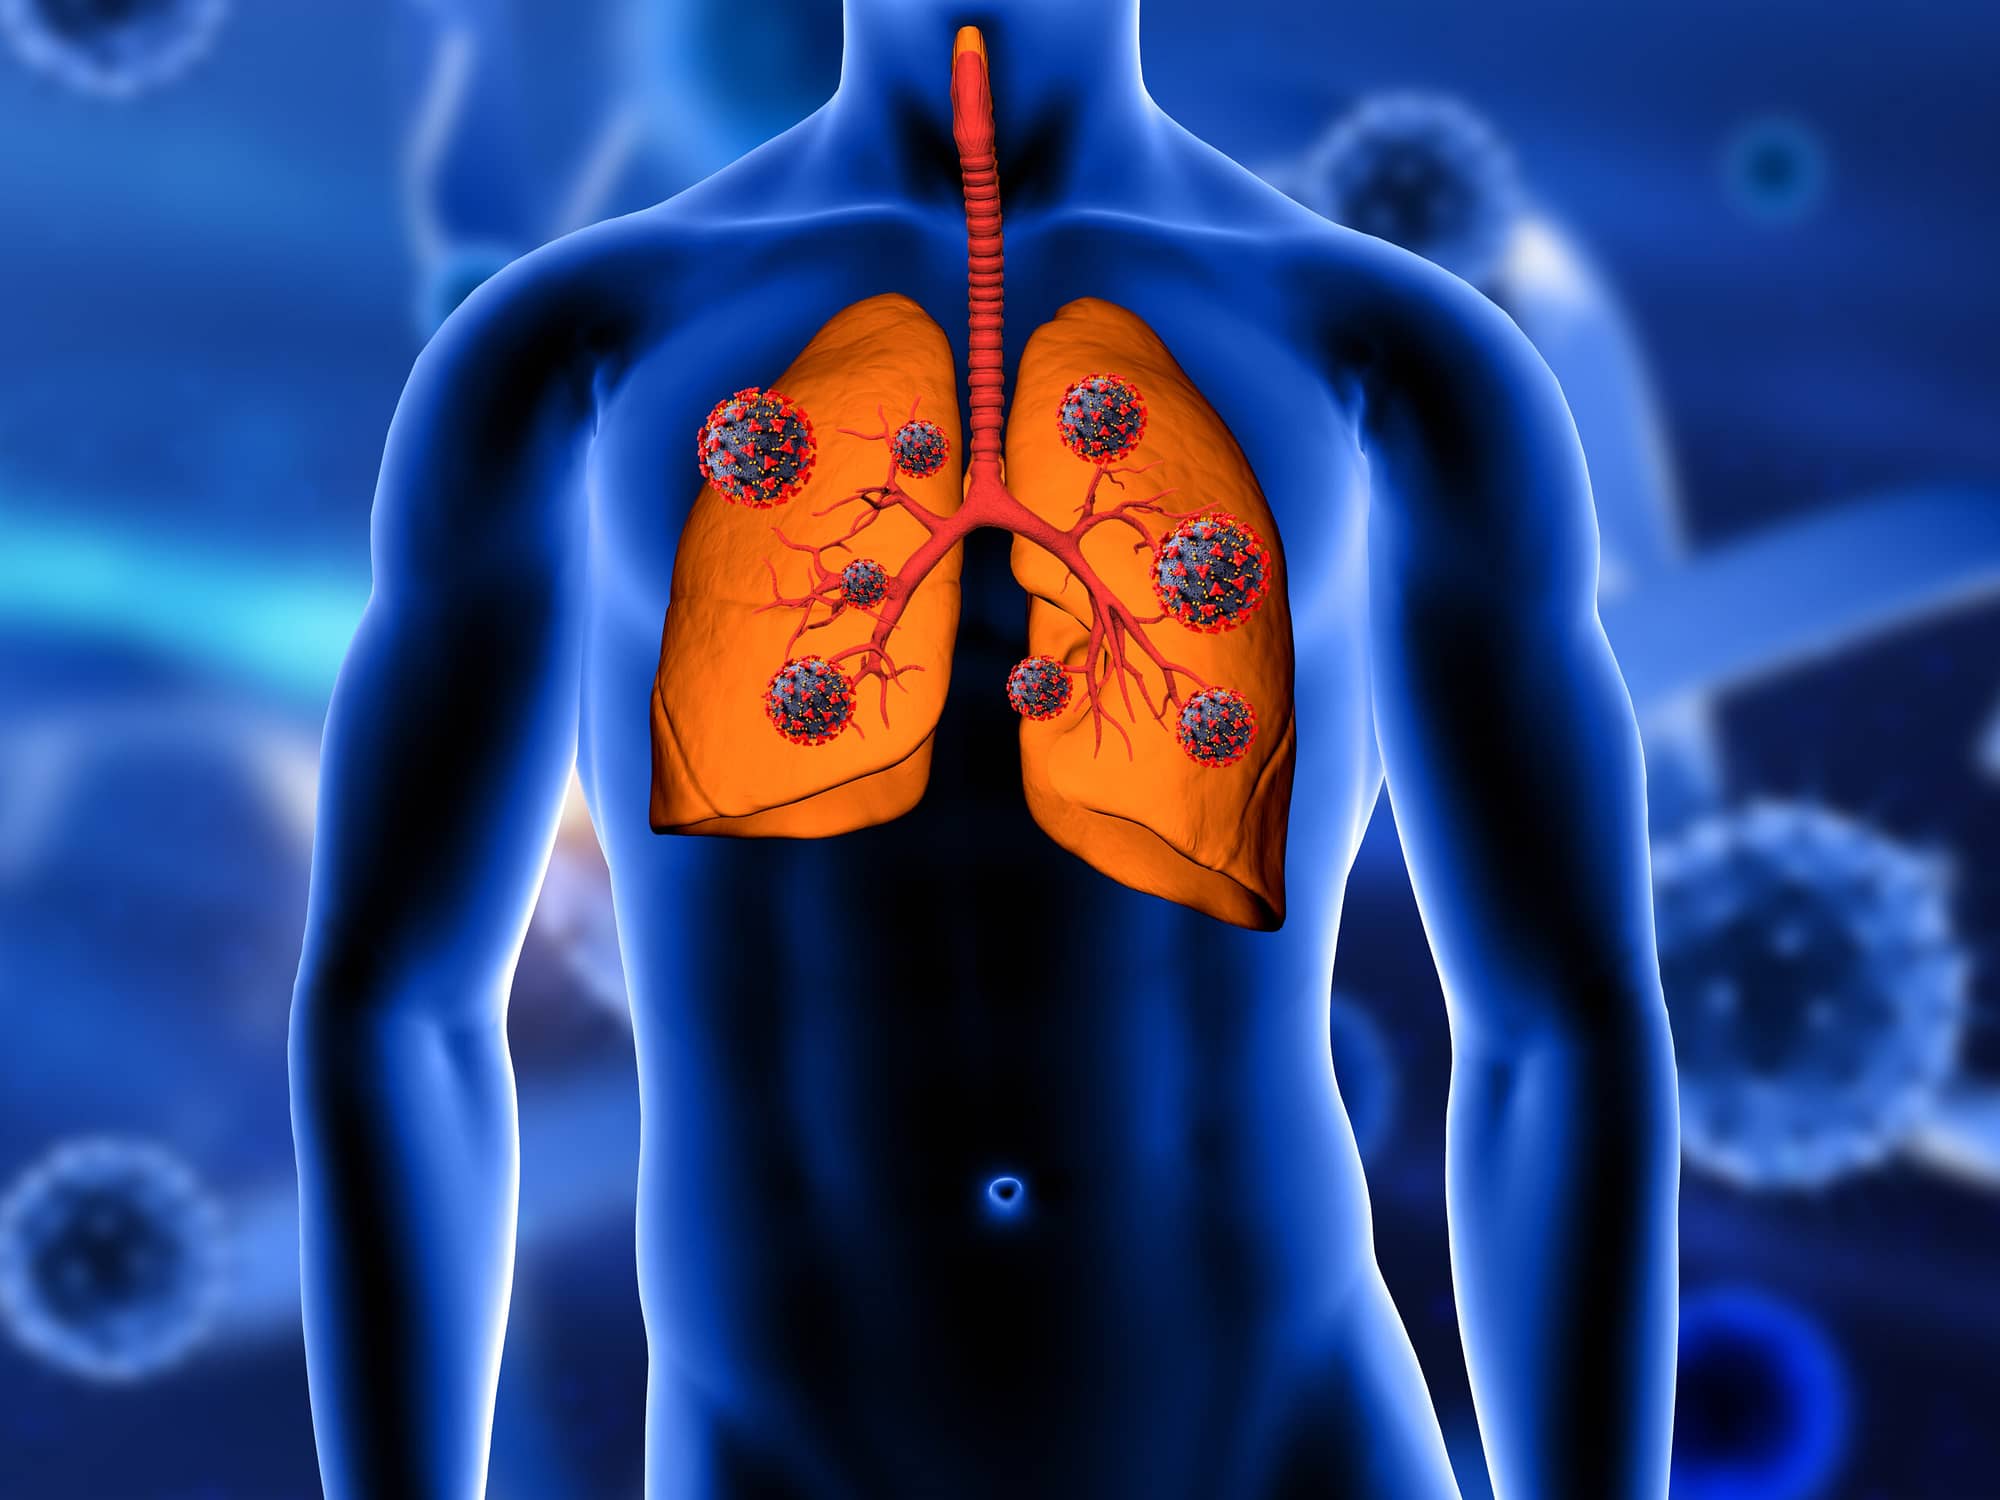 3D render of a medical background with close up of lungs being attacked by Covid 19 virus cells - role of mono virus and fat cells in long covid